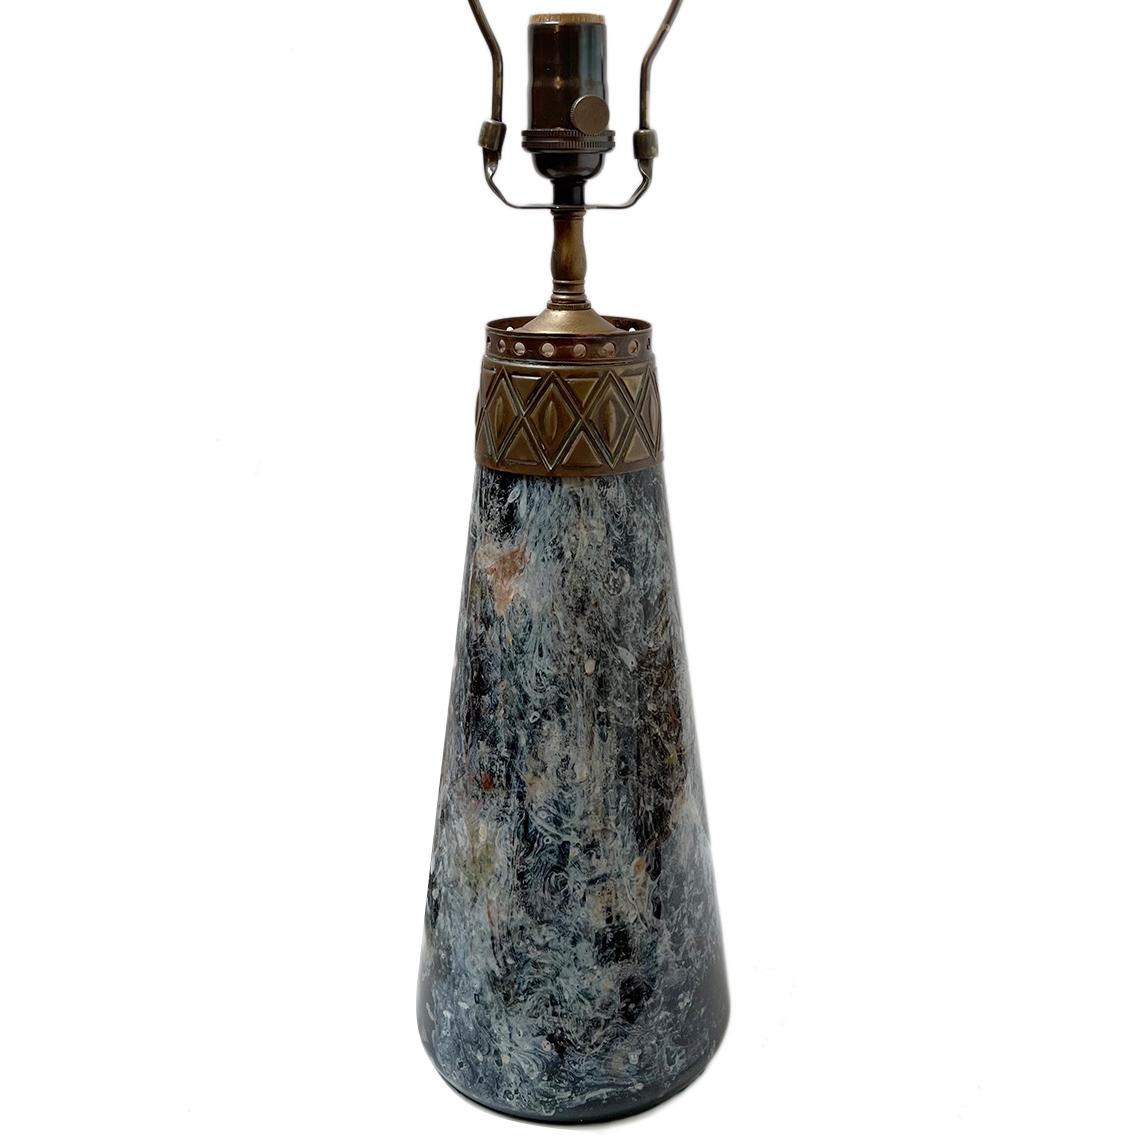 A circa 1900 French art glass oil lamp converted to electric with bronze detailing.

Measurements:
Height of body: 14.5